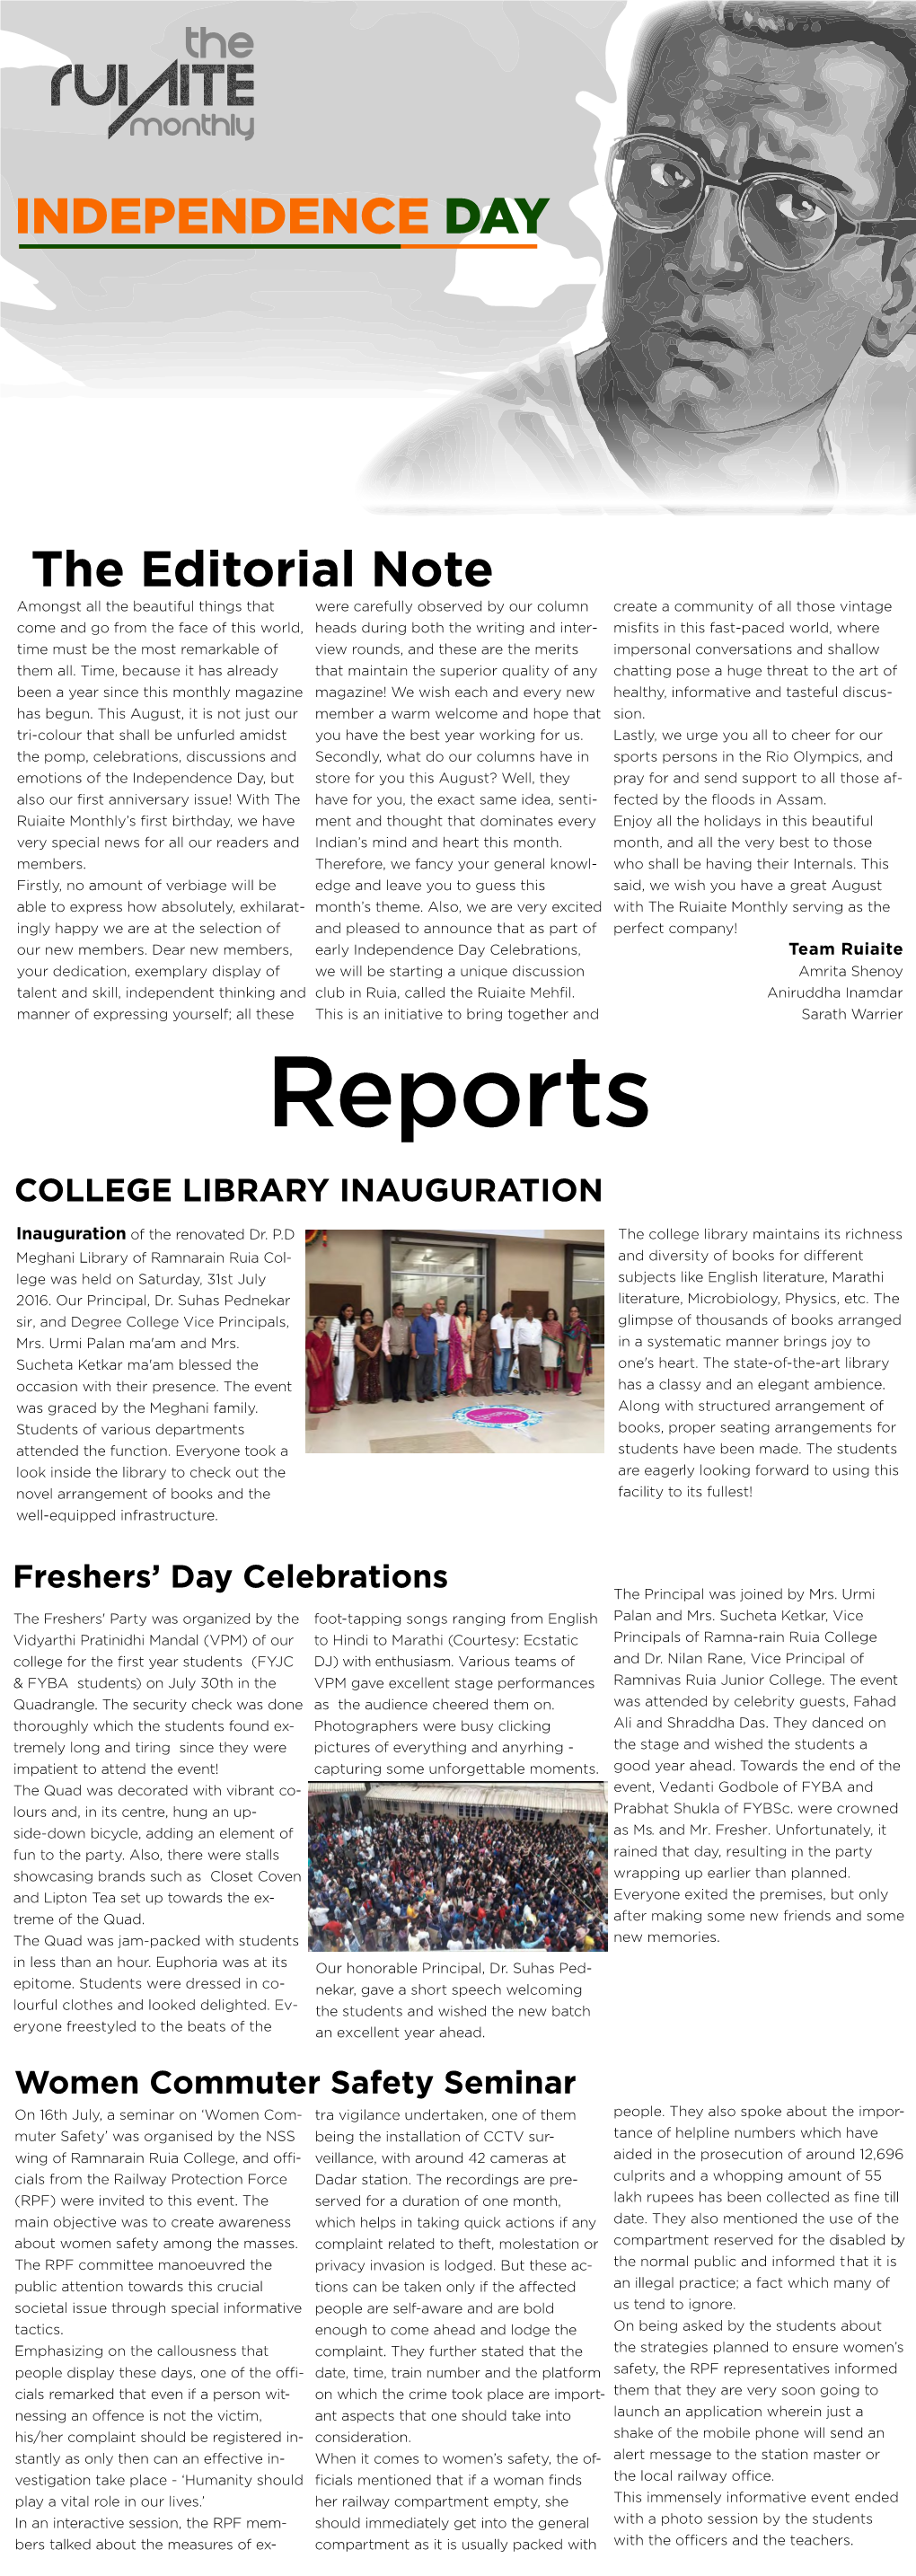 COLLEGE LIBRARY INAUGURATION Freshers' Day Celebrations